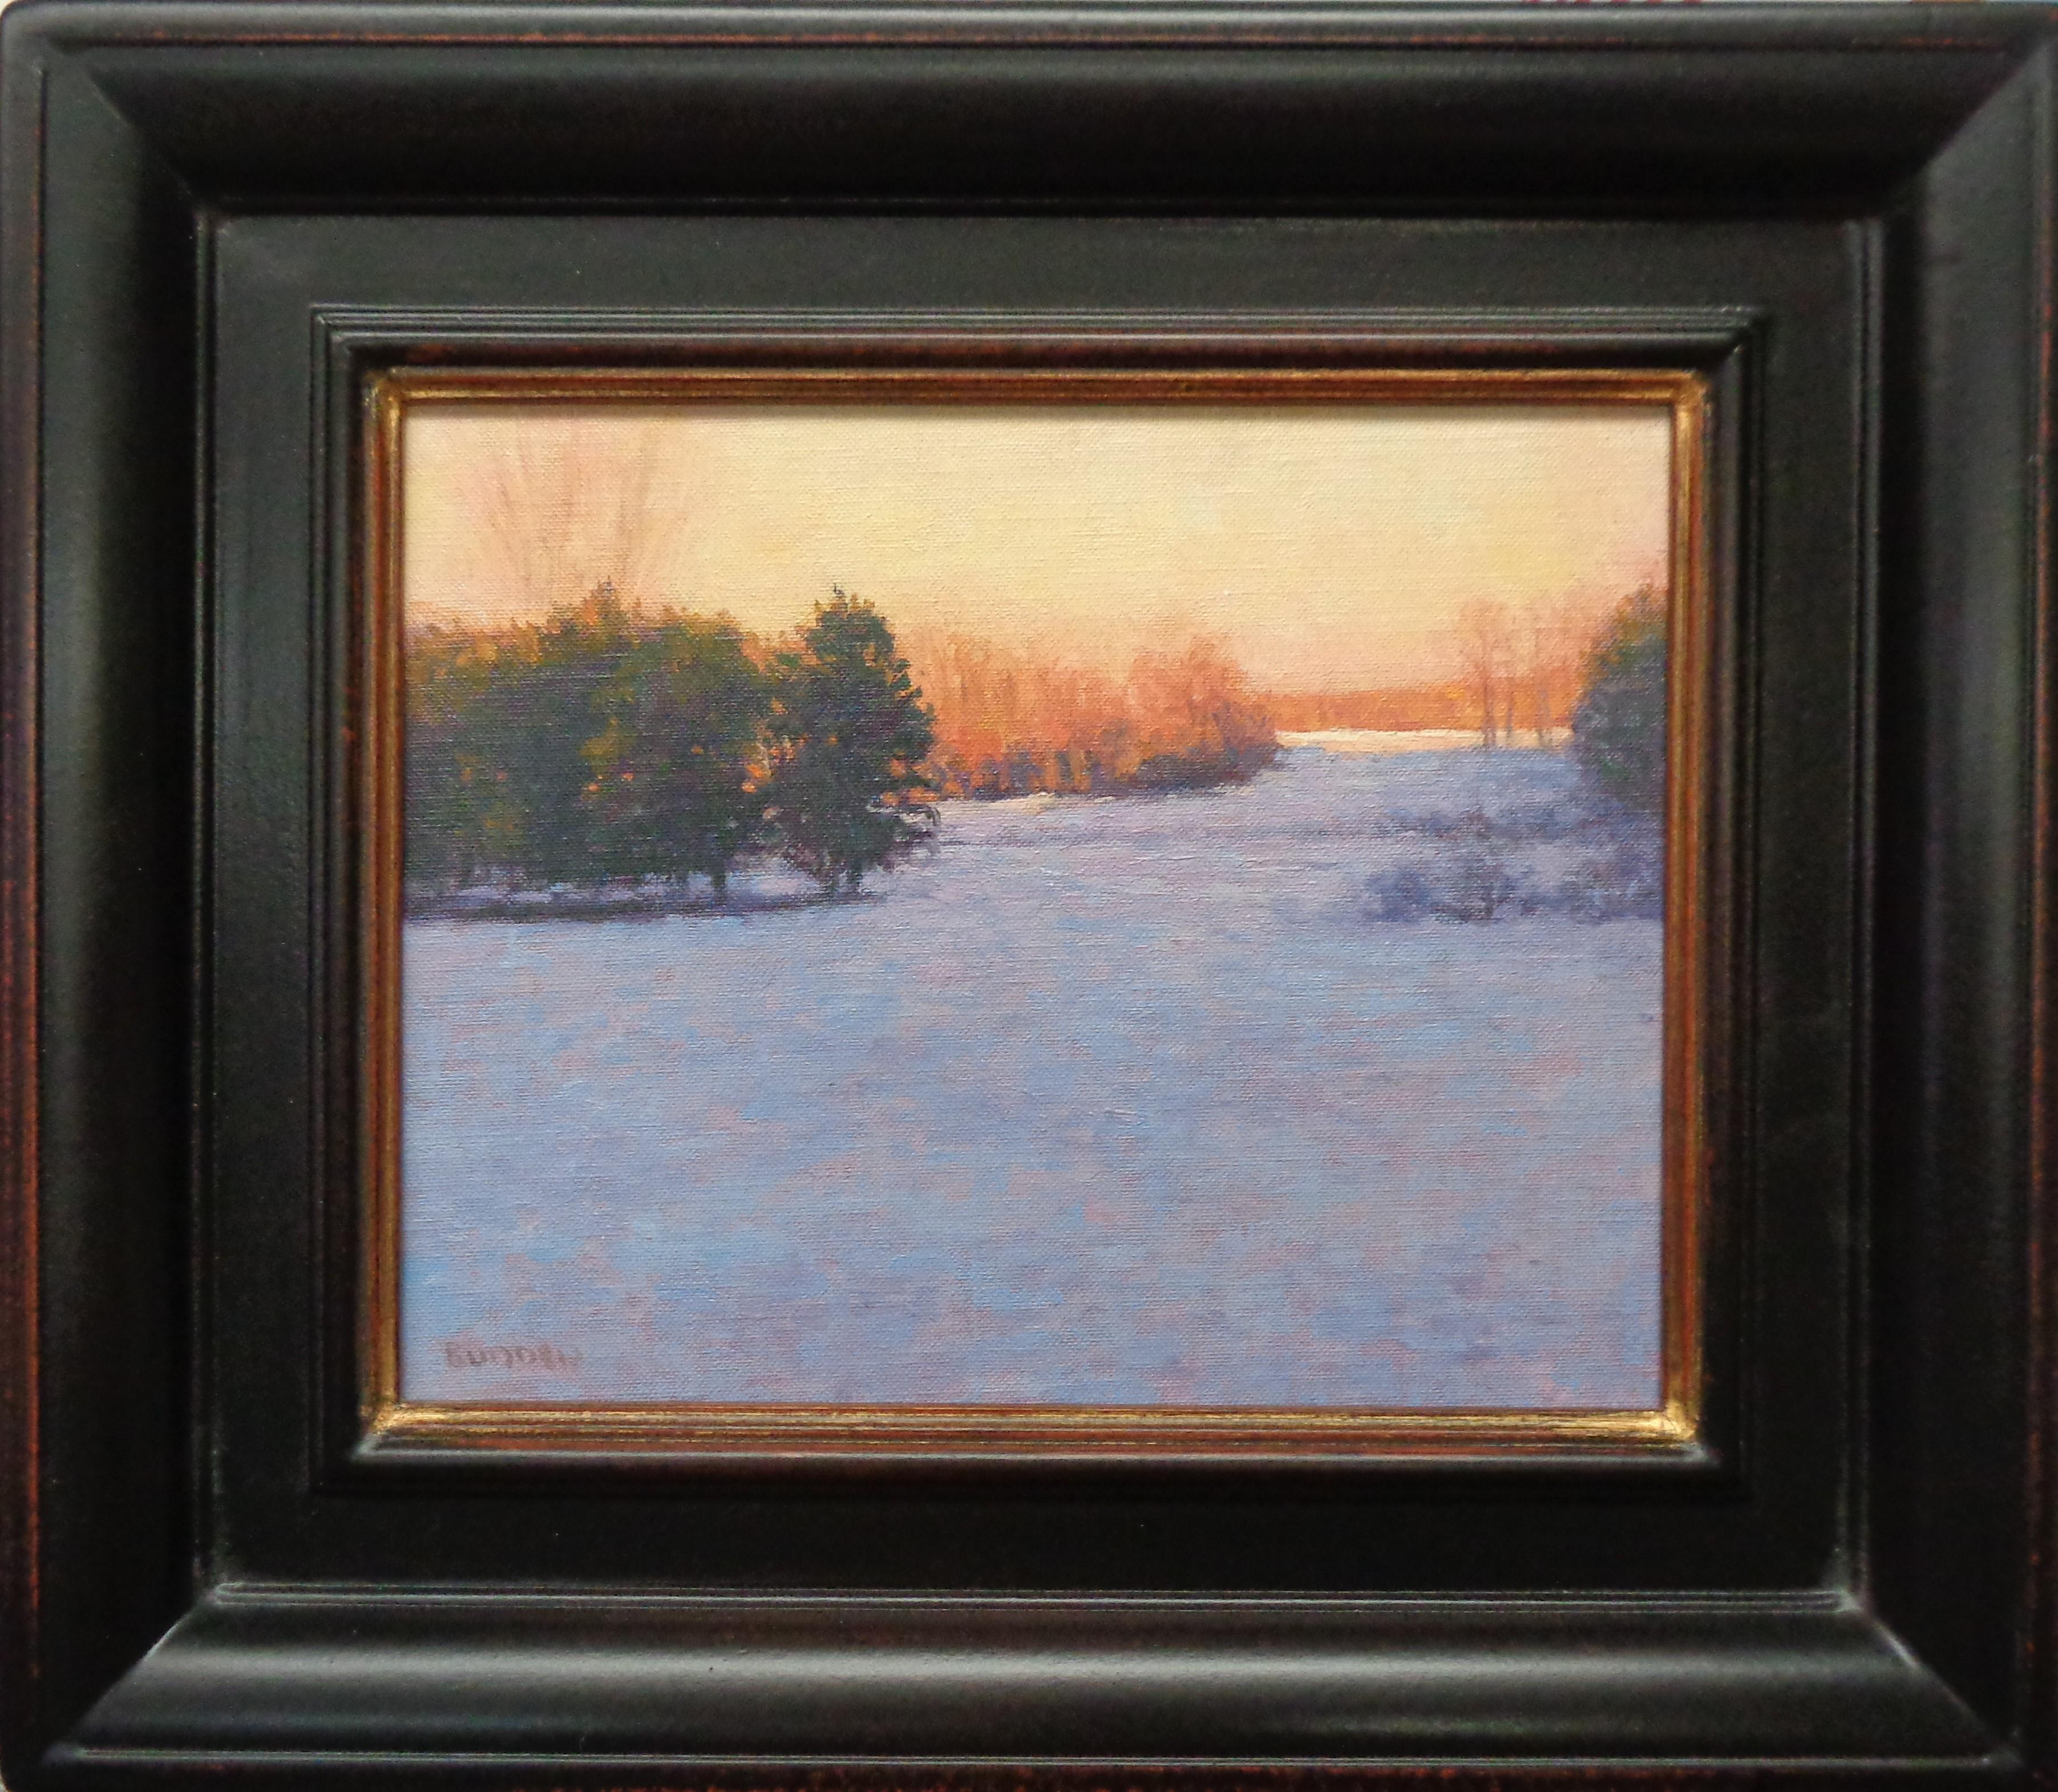 Evening Light is a beautiful impressionistic winter landscape snow scene that I did out the back of my studio. The painting is on a canvas panel and exudes the rich qualities of oil paint with bright strong color, a variety of lost and found edges,